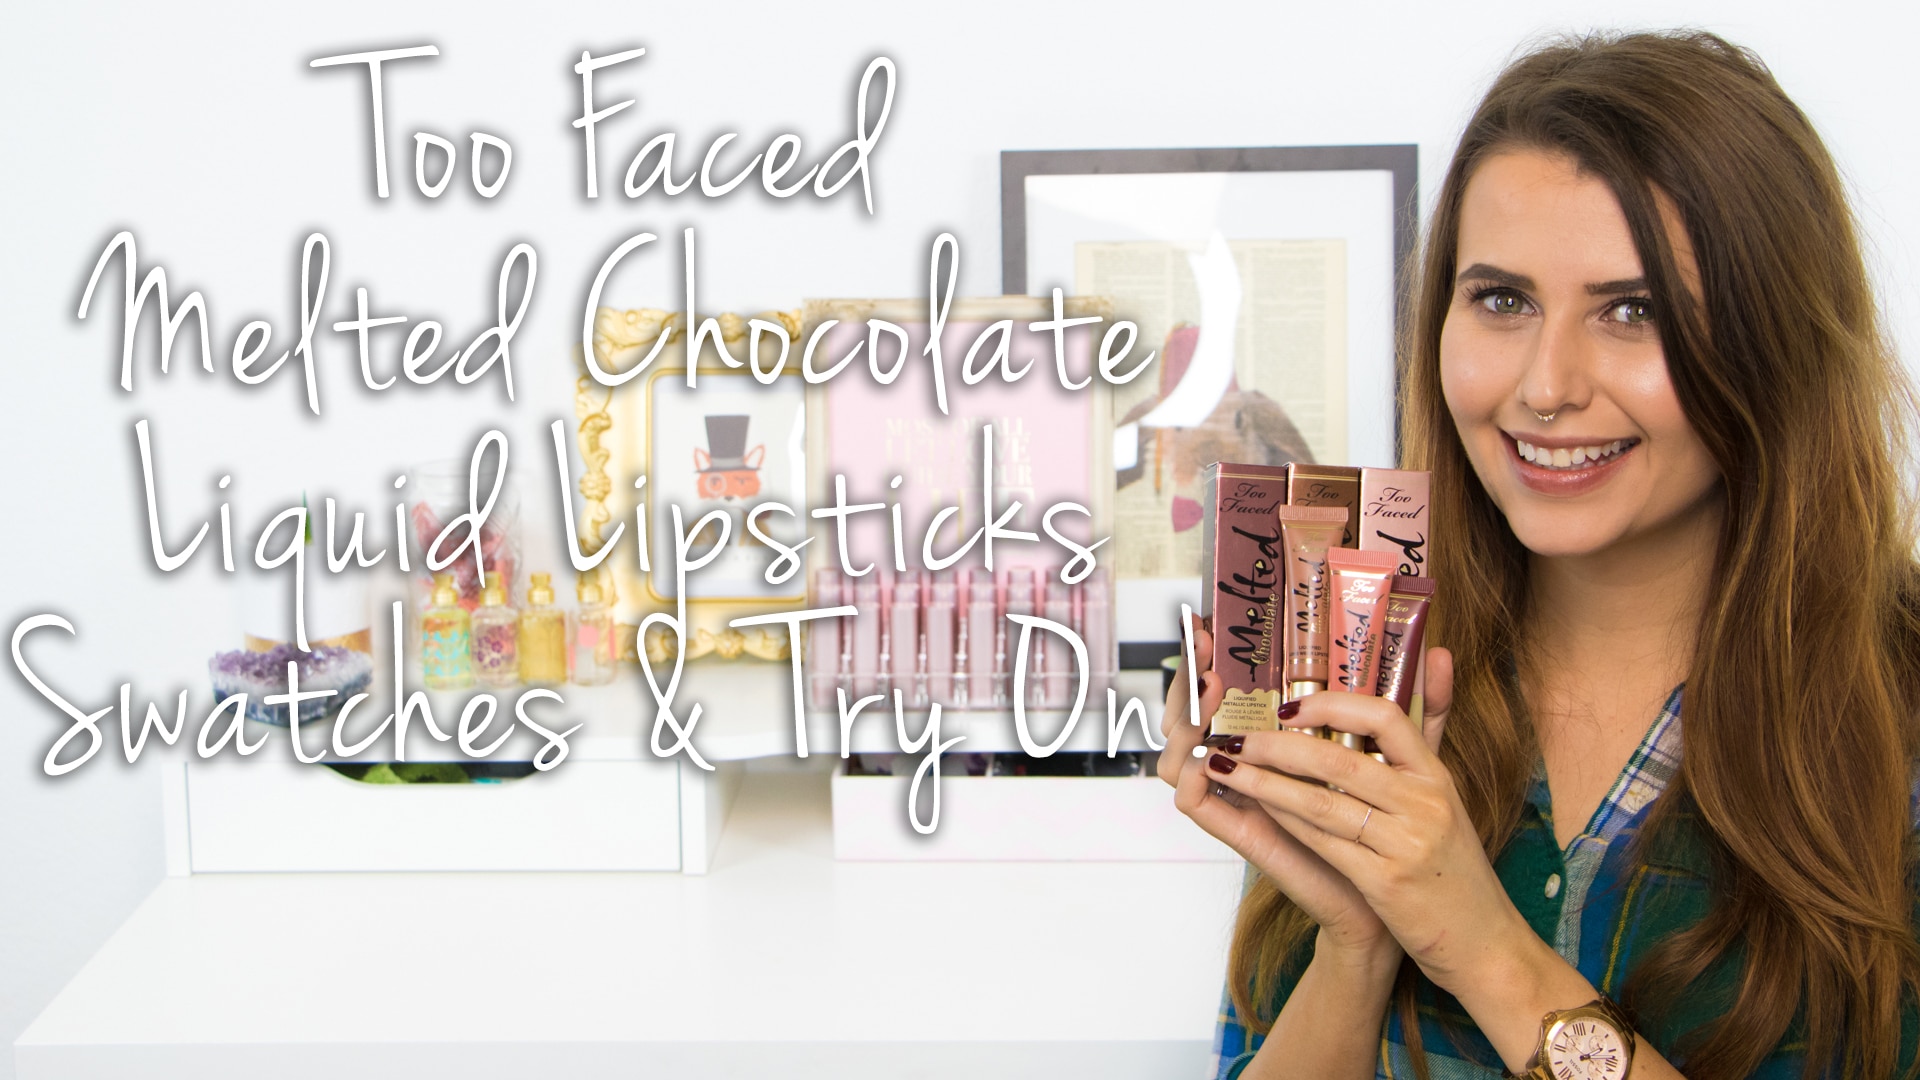 Too Faced Melted Chocolate Lipstick Swatches & Try On